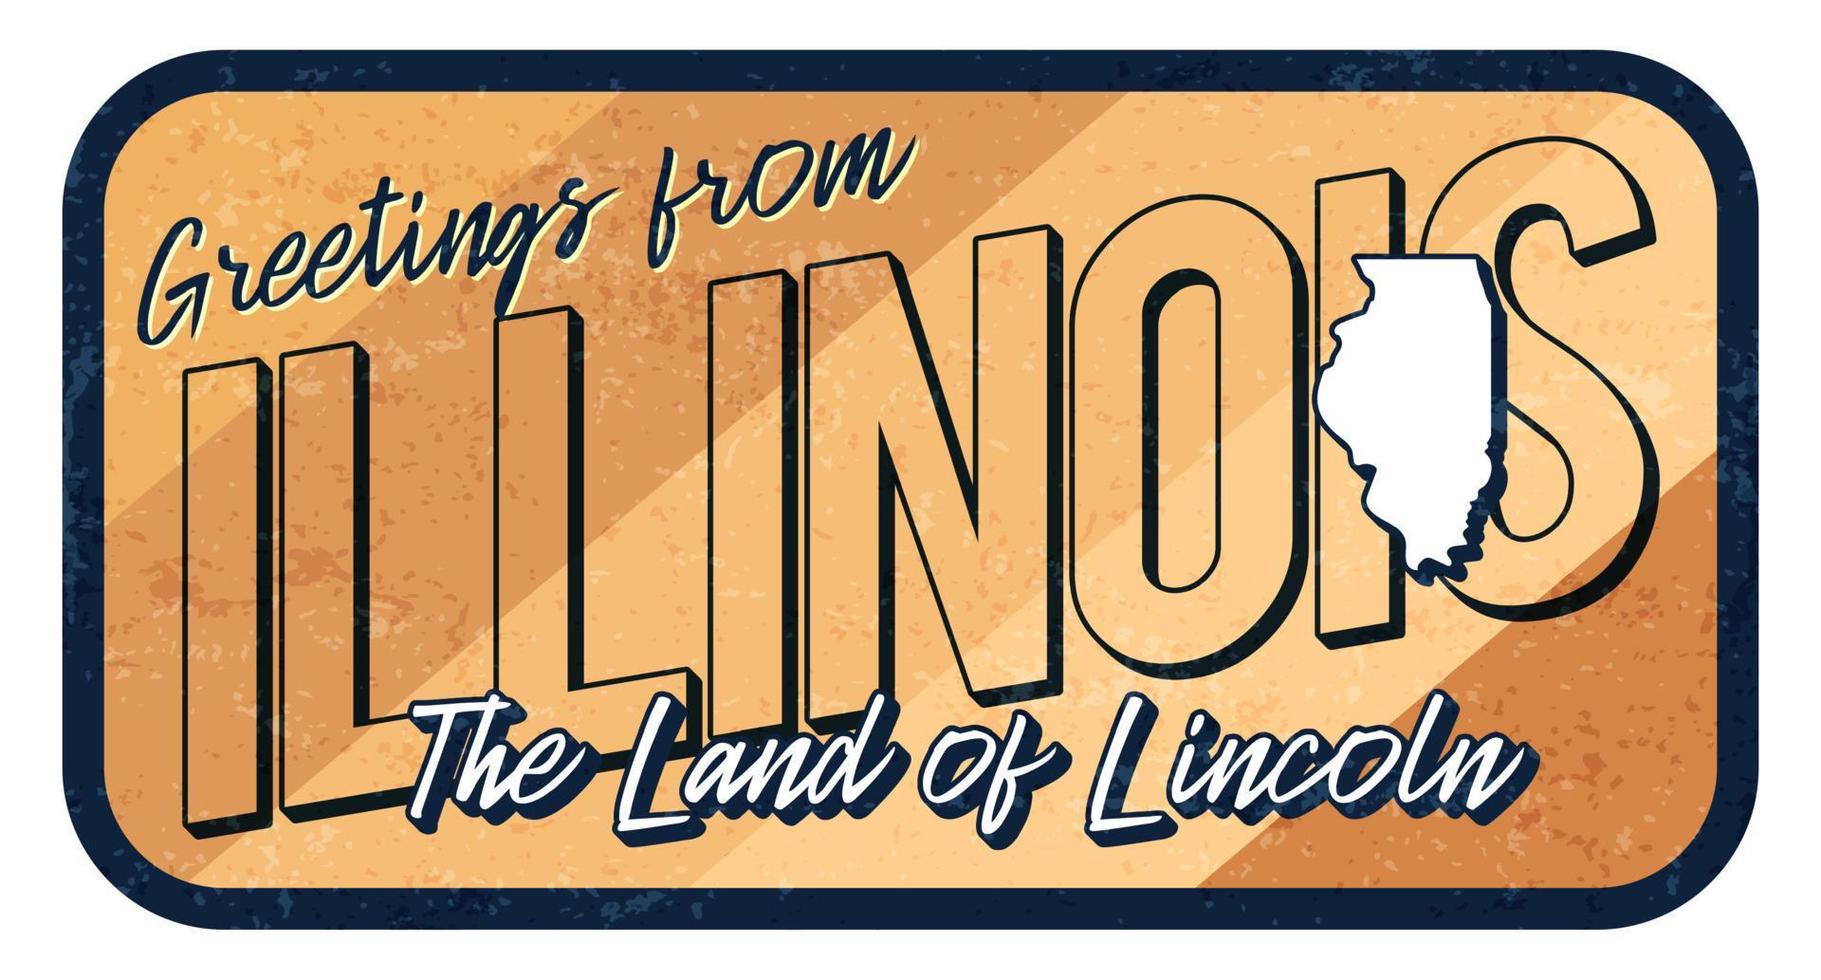 Greeting from Illinois vintage rusty metal sign vector illustration. Vector state map in grunge style with Typography hand drawn lettering